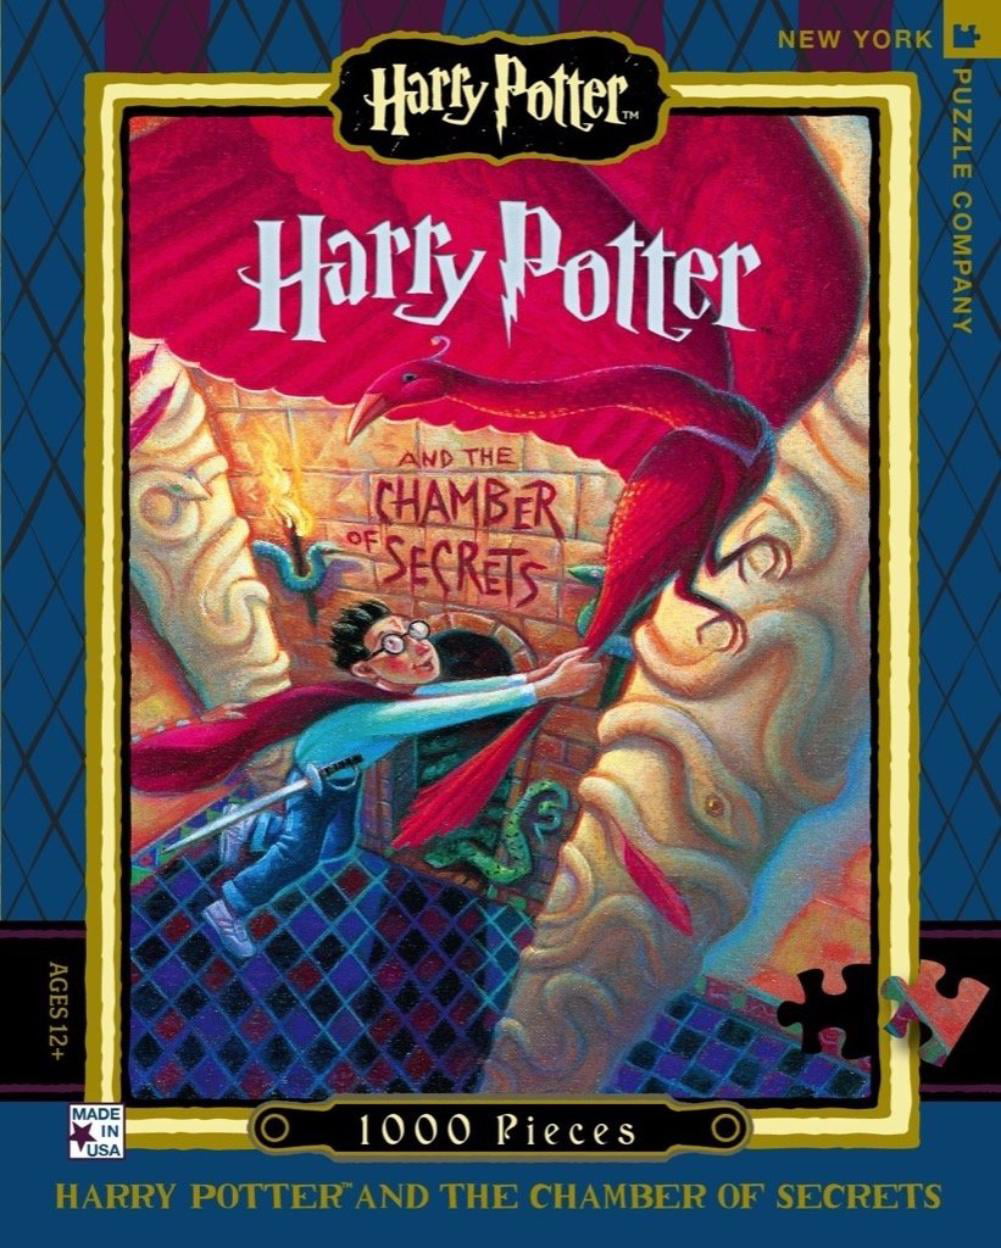 Harry Potter and The Chamber of Secrets 1000 Piece Jigsaw Puzzle NYPC for sale online 